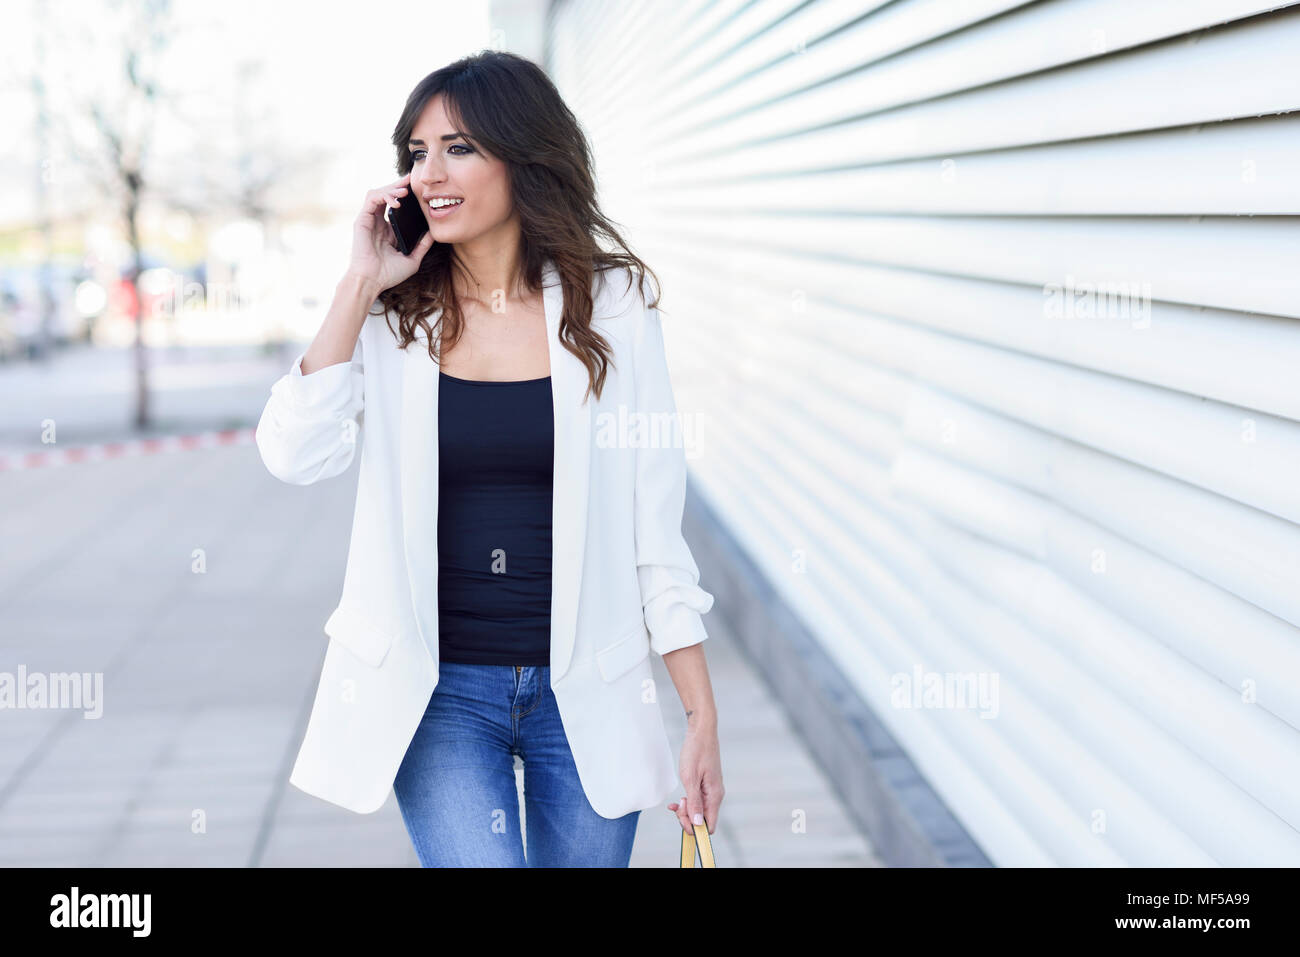 Portrait of smiling businesswoman on the phone Stock Photo